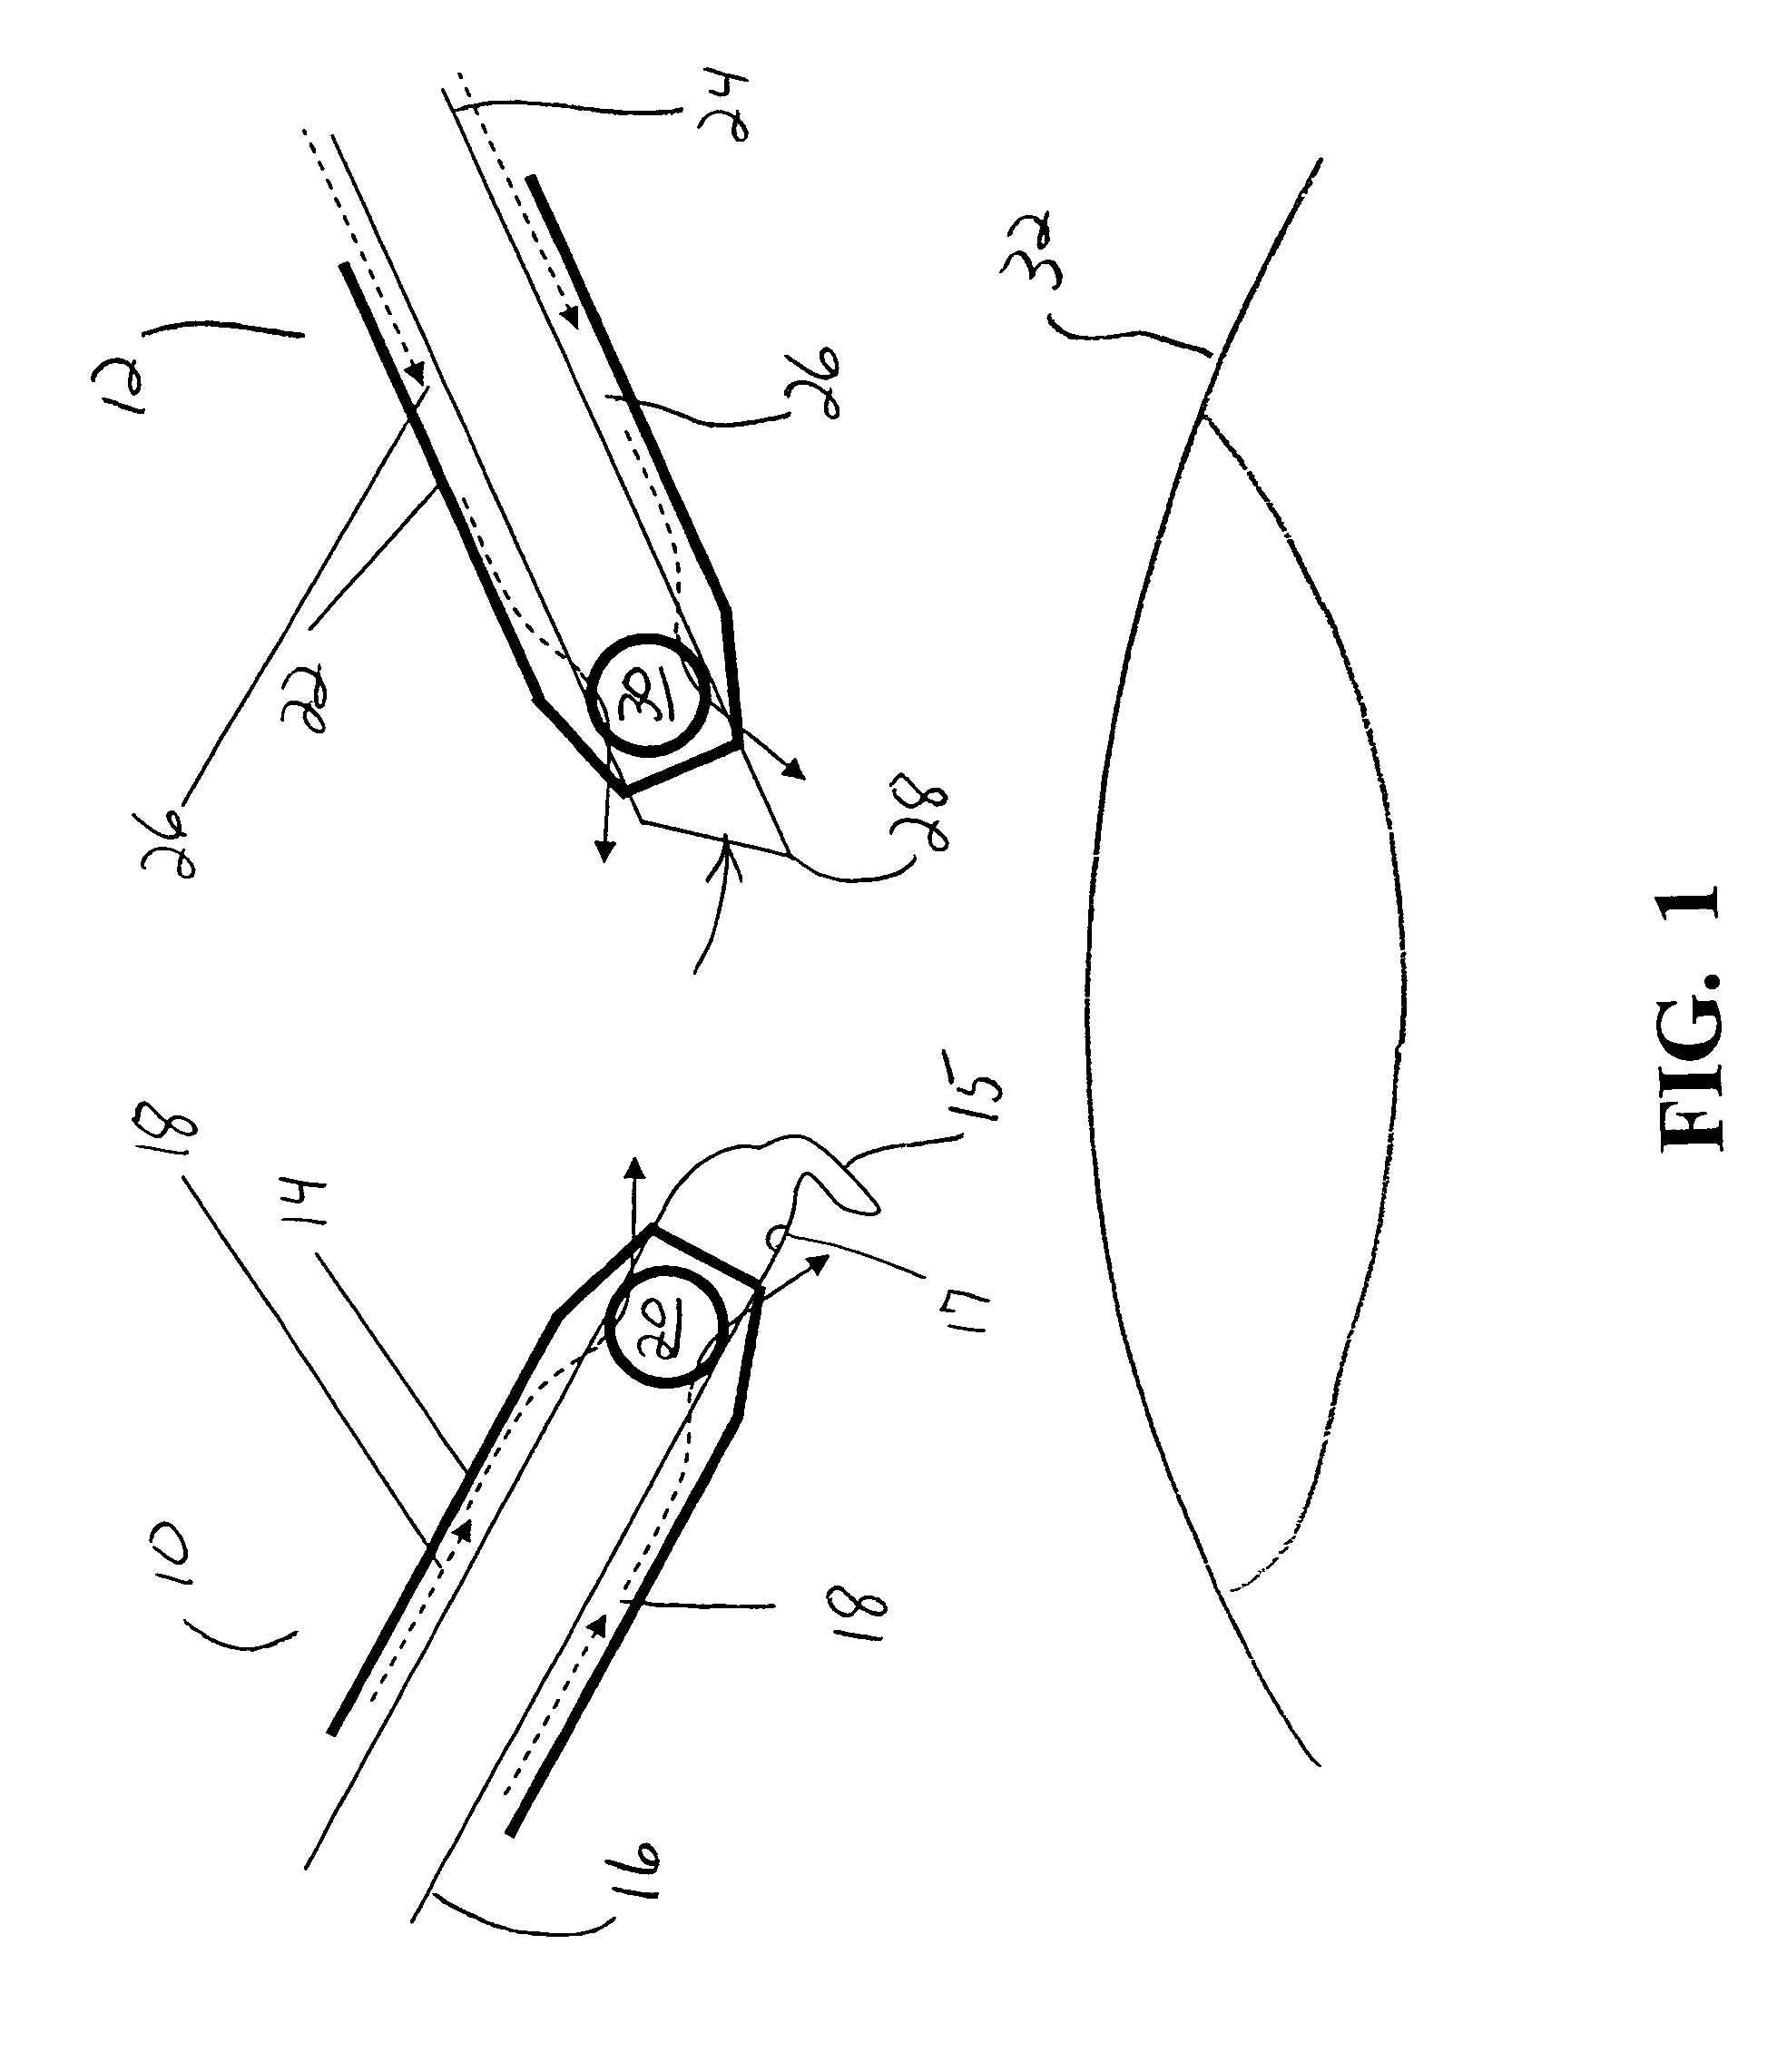 Surgical method and apparatus using dual irrigation paths